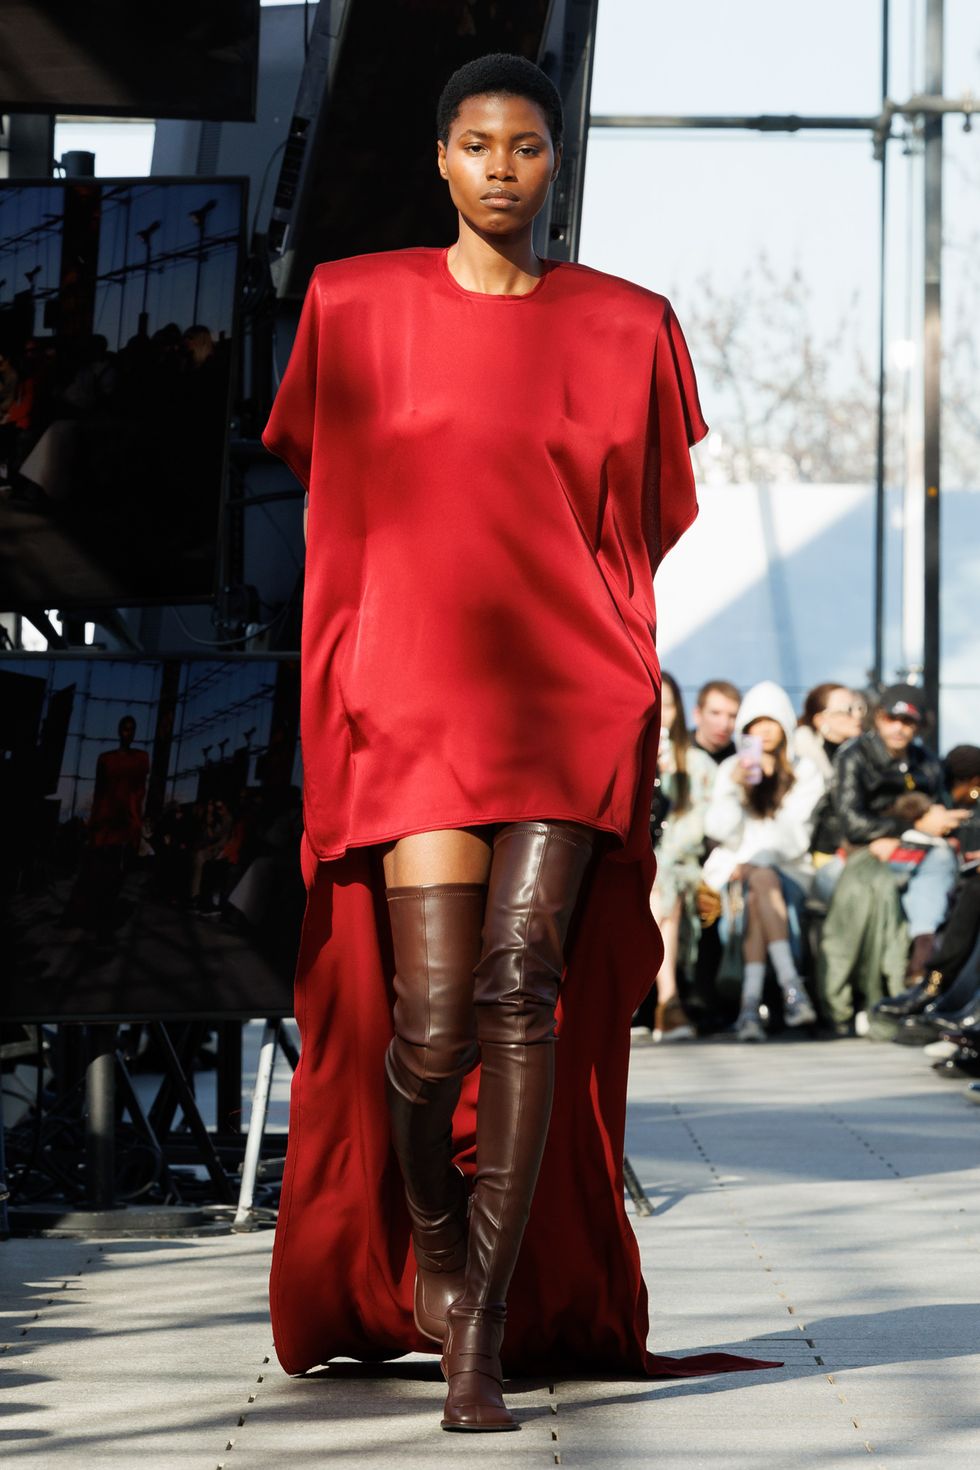 a man wearing a red dress and boots